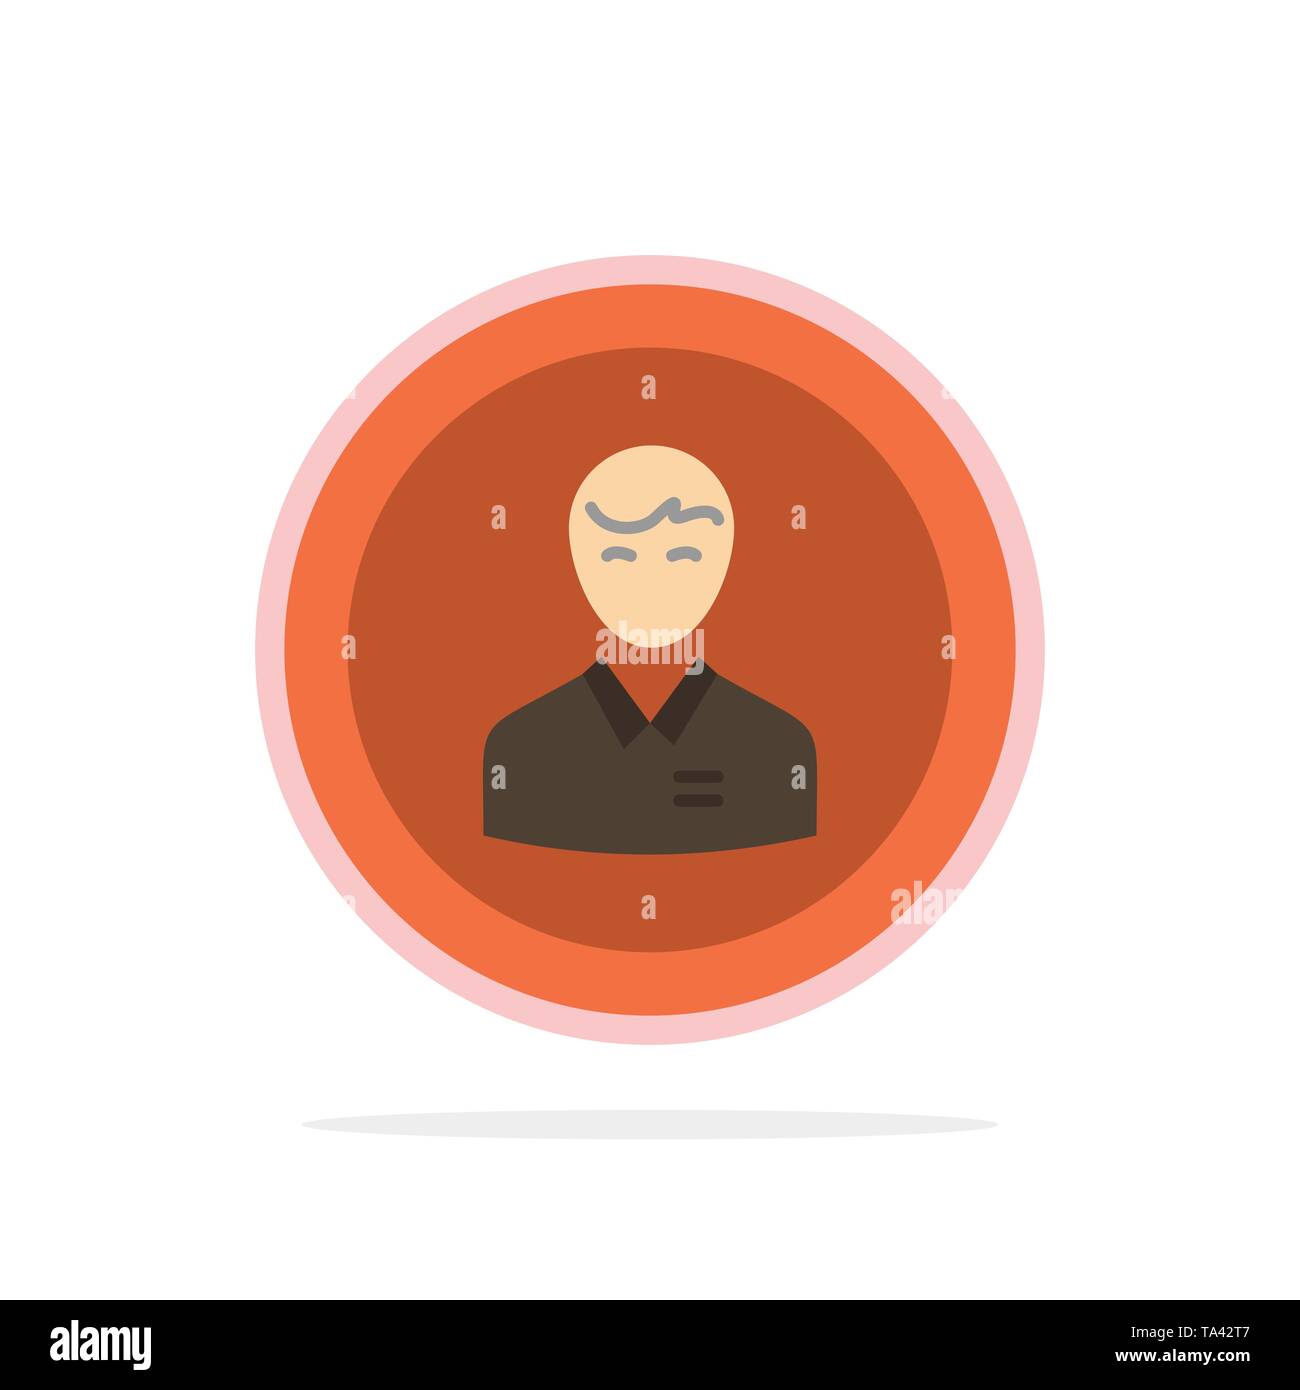 Man, user, people, Business, profile, Avatar icon